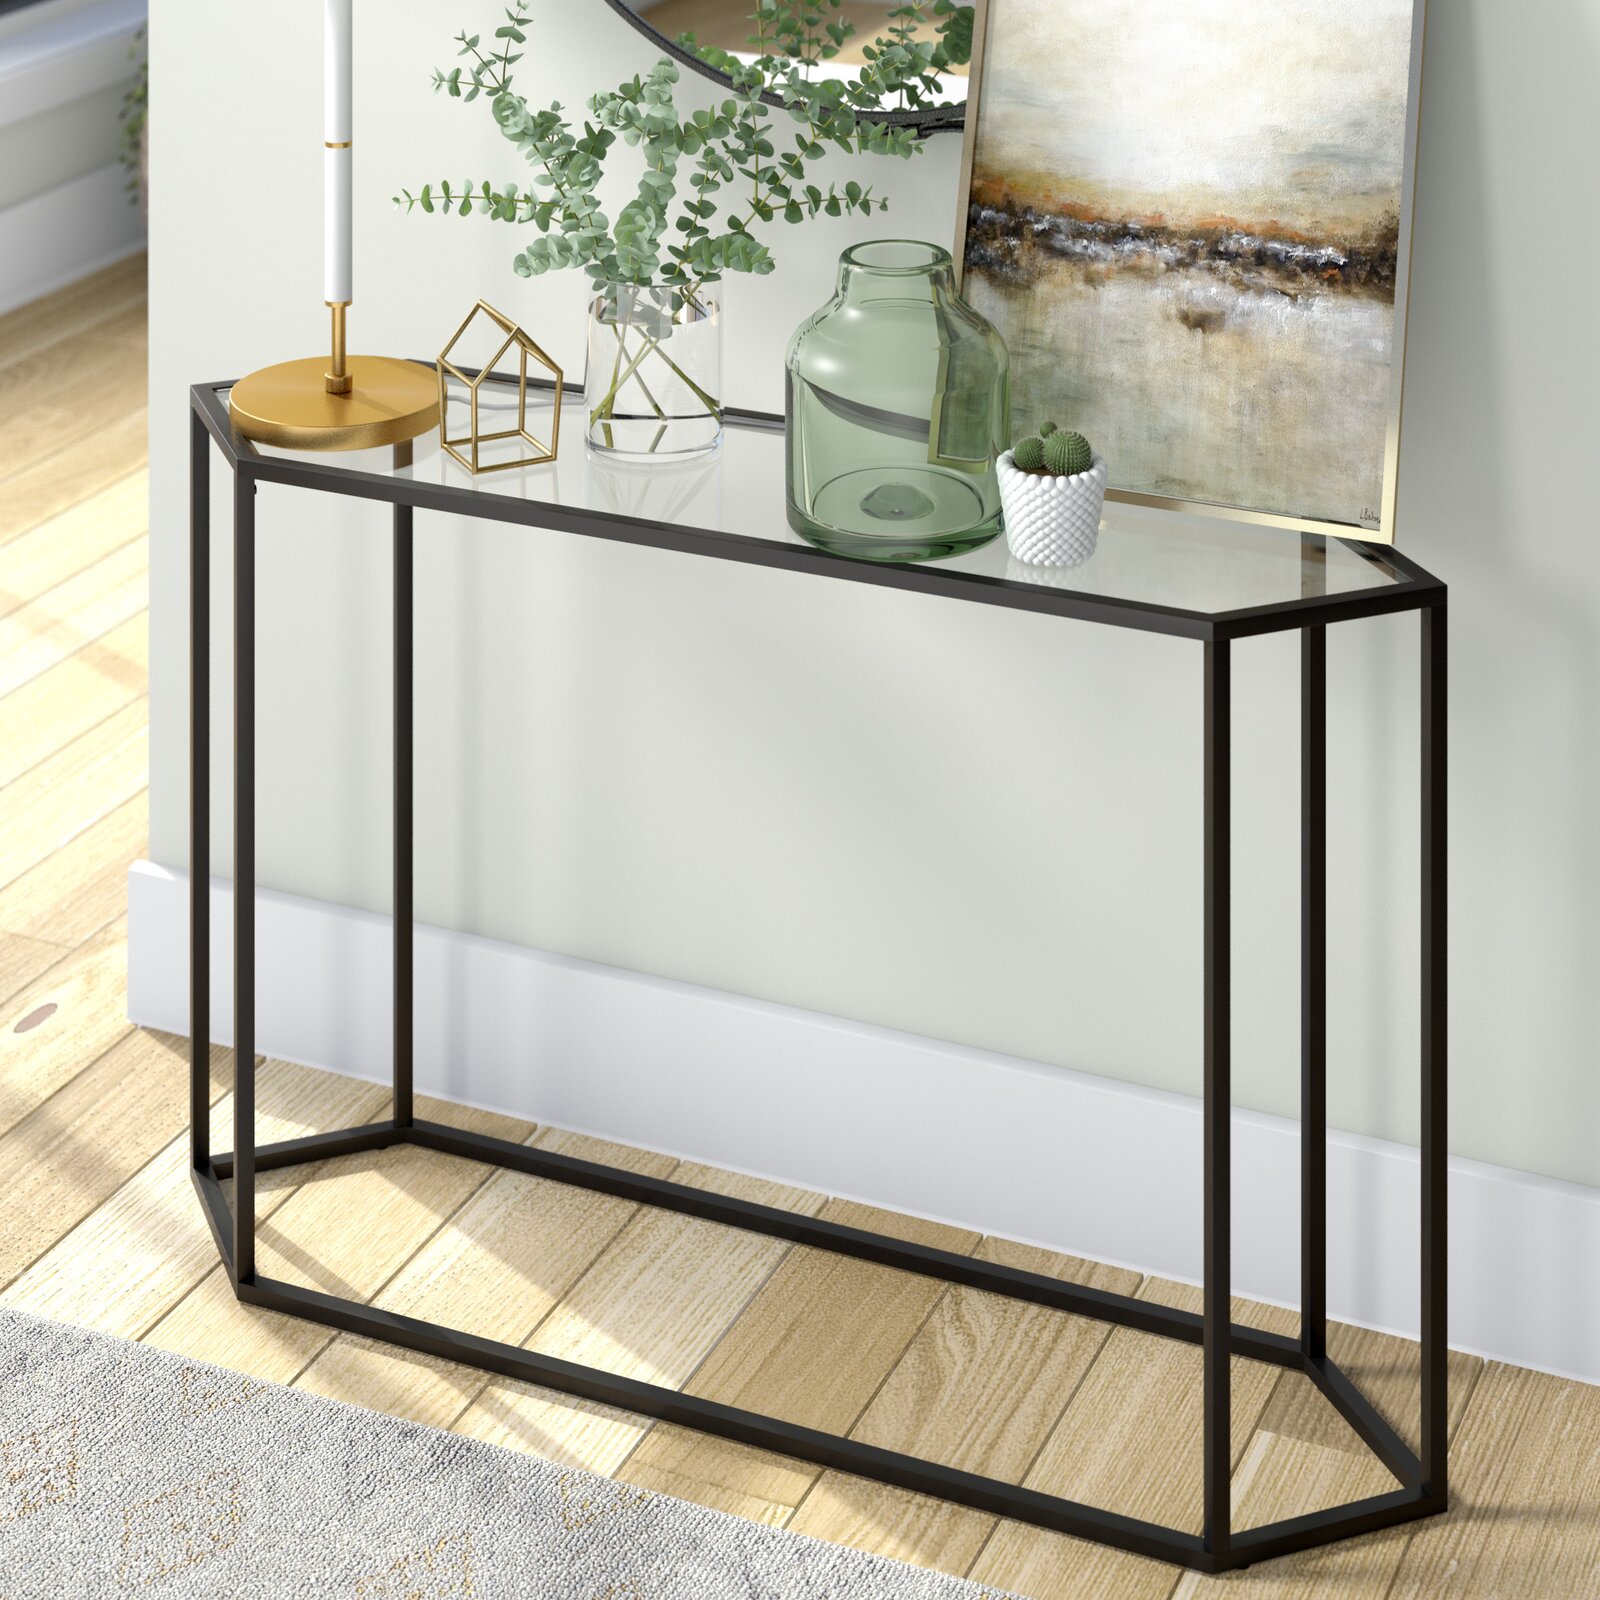 LOUIS VUITTON CRUSHED GLASS ENTRYWAY/CONSOLE TABLE DIY  Entryway console  table, Diy console table, Glam decor diy